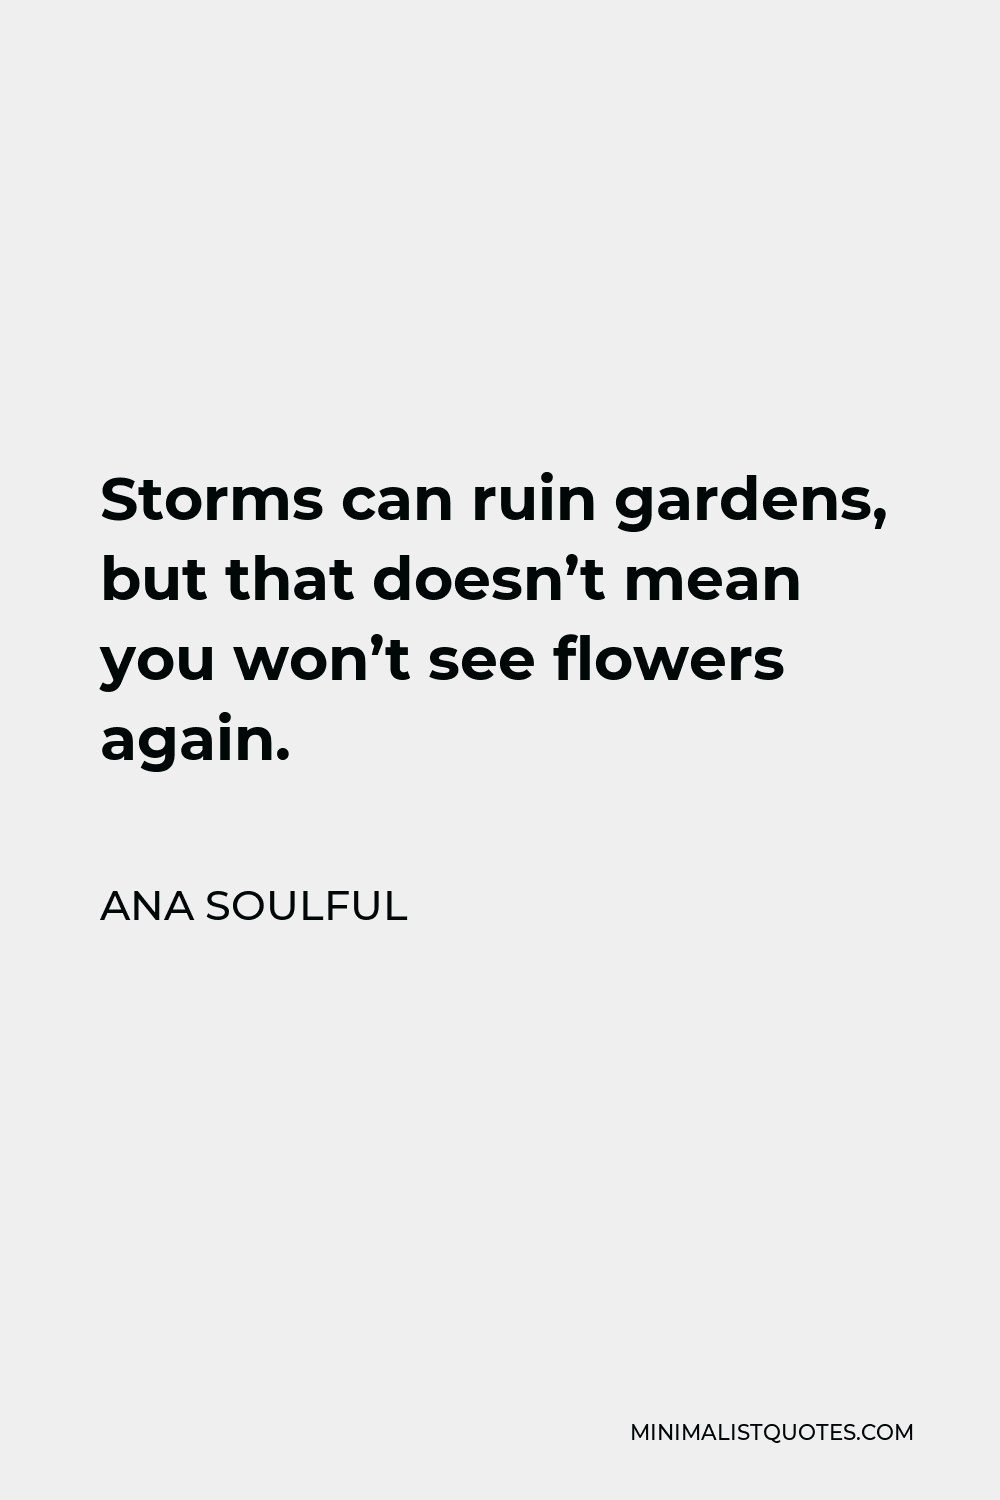 Ana Soulful Quote - Storms can ruin gardens, but that doesn’t mean you won’t see flowers again.